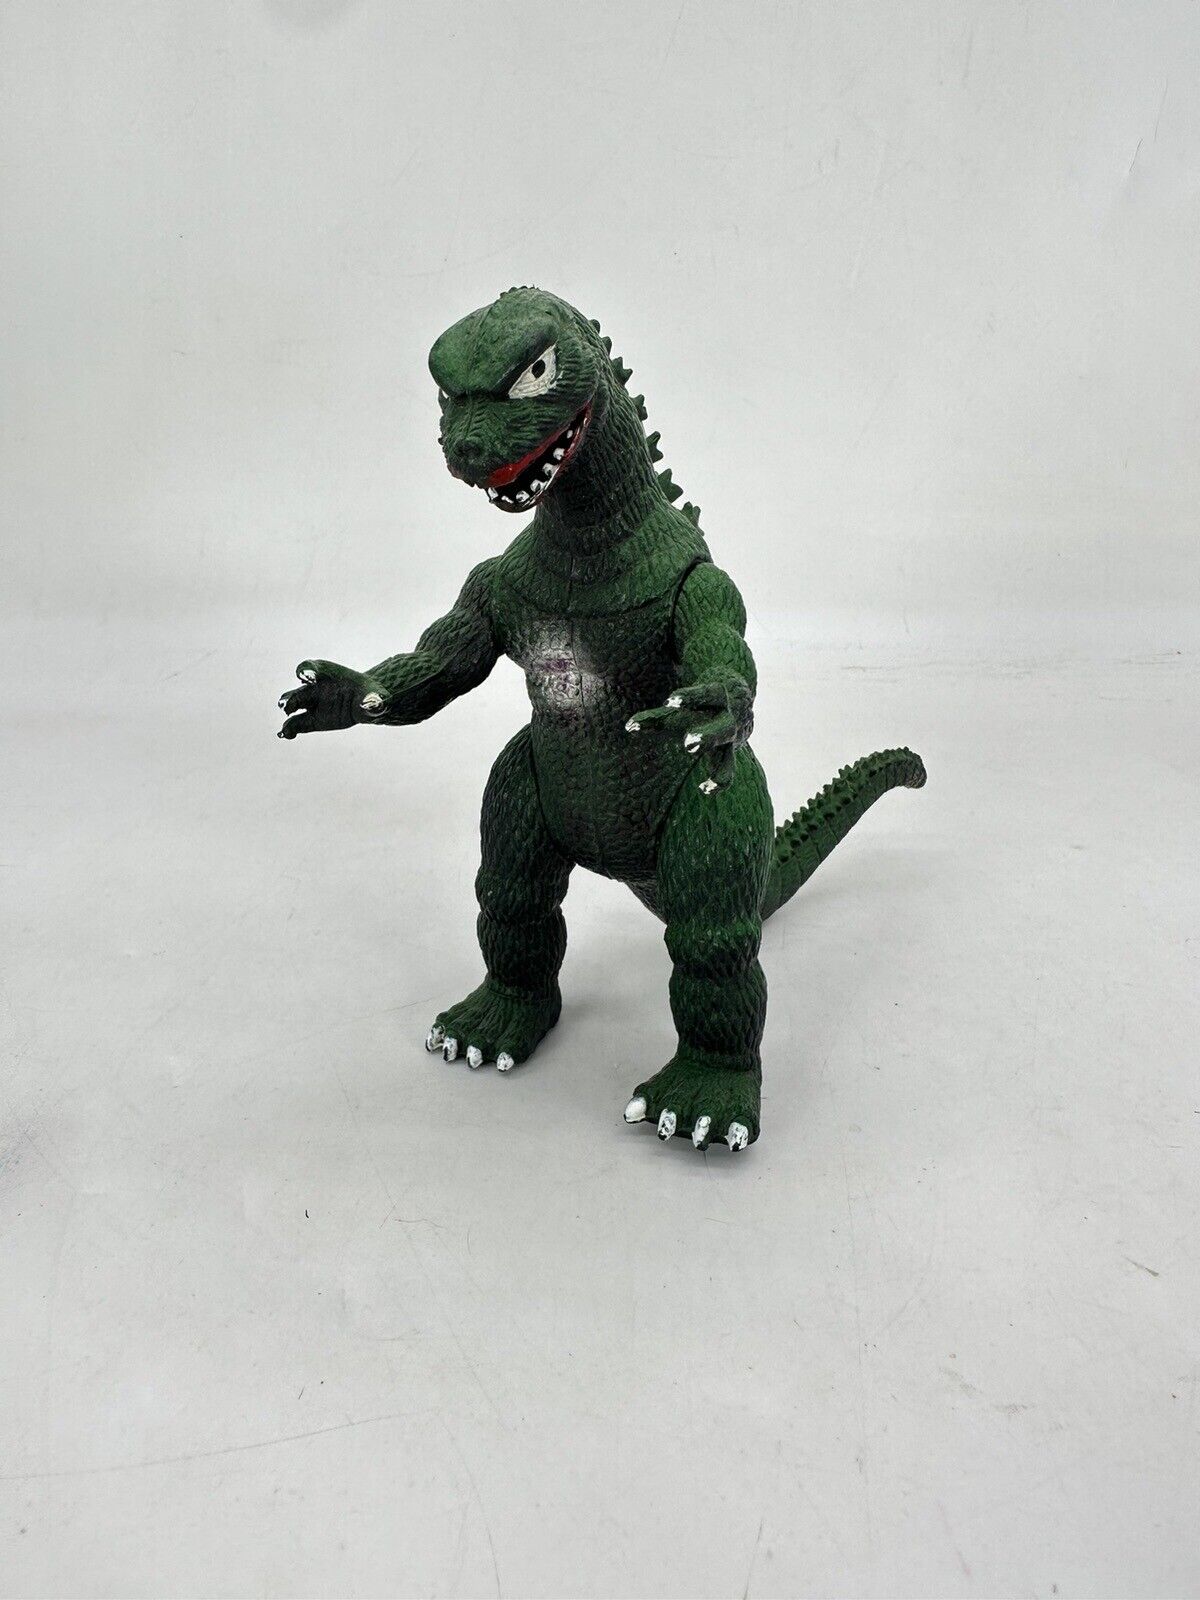 Vintage 1985 IMPERIAL TOHO GODZILLA Articulated Monsters Toy Action Figure 6”